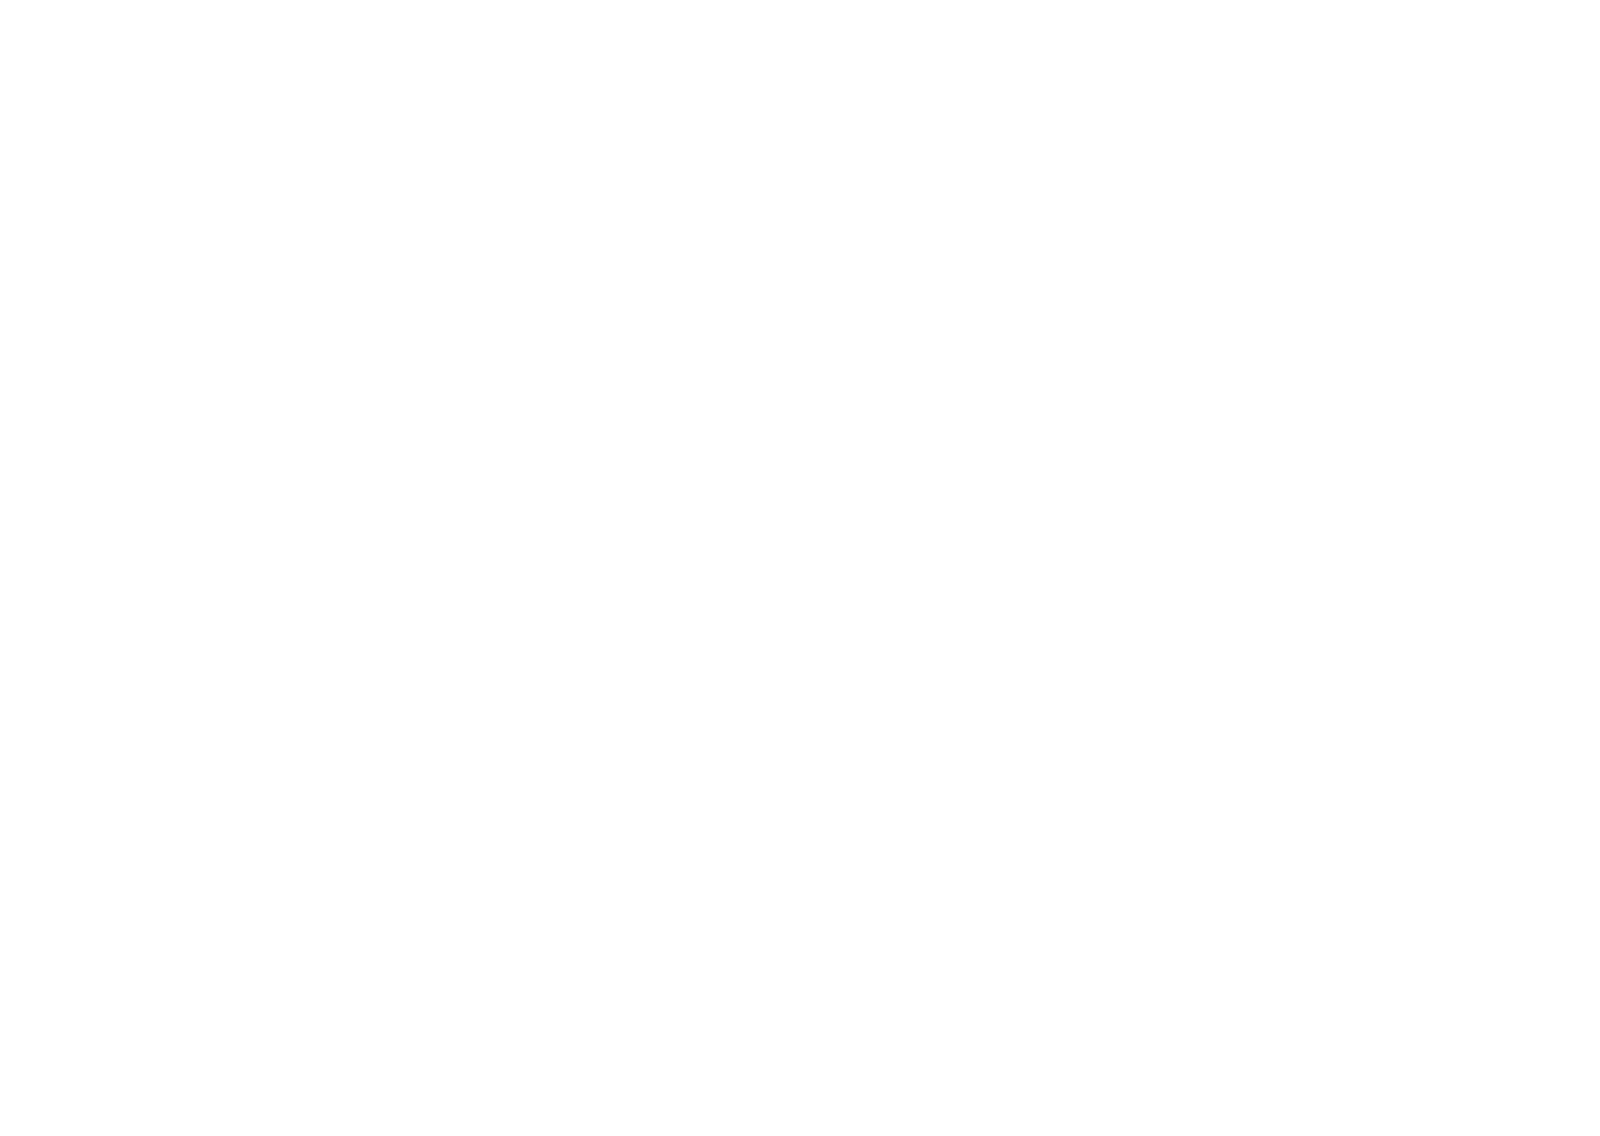 The Arc of East Central Iowa